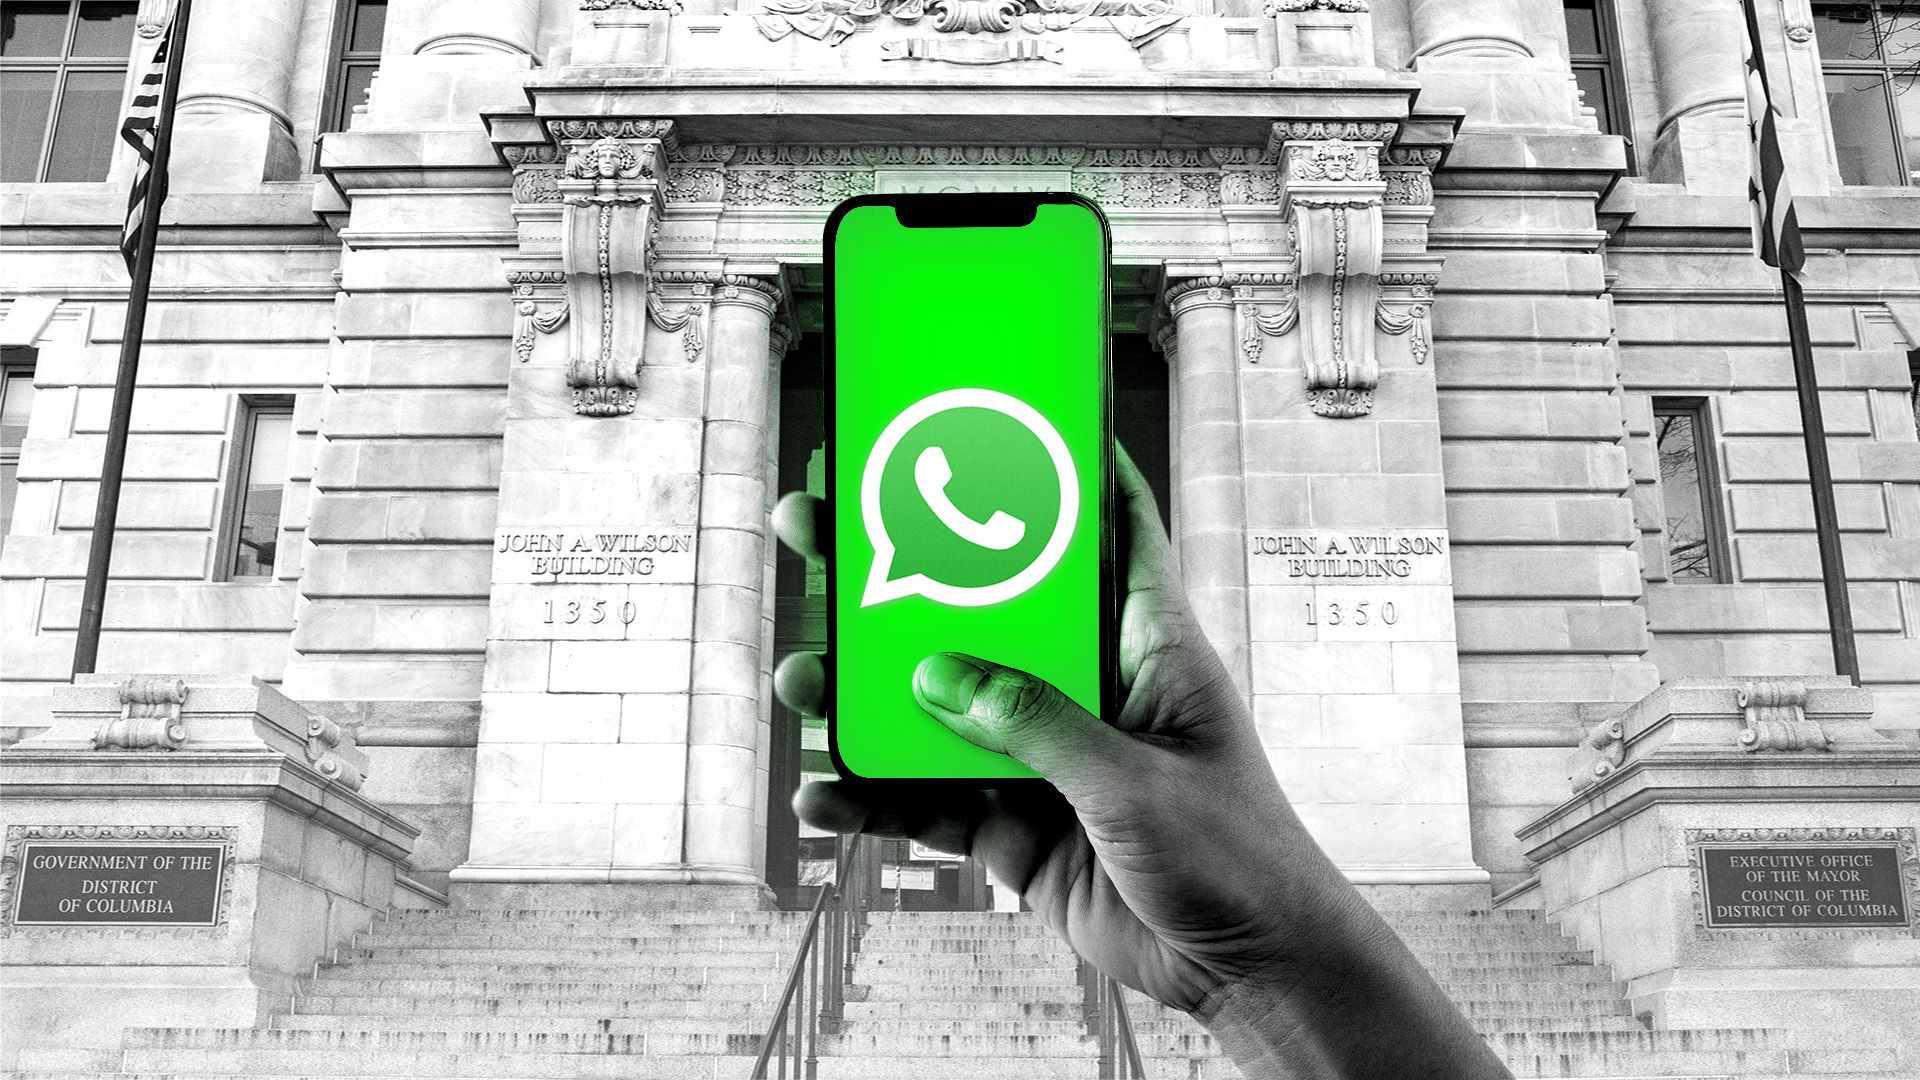 Illustration of a hand holding a smart phone with a WhatsApp logo on the screen, in front of the John A Wilson Building.